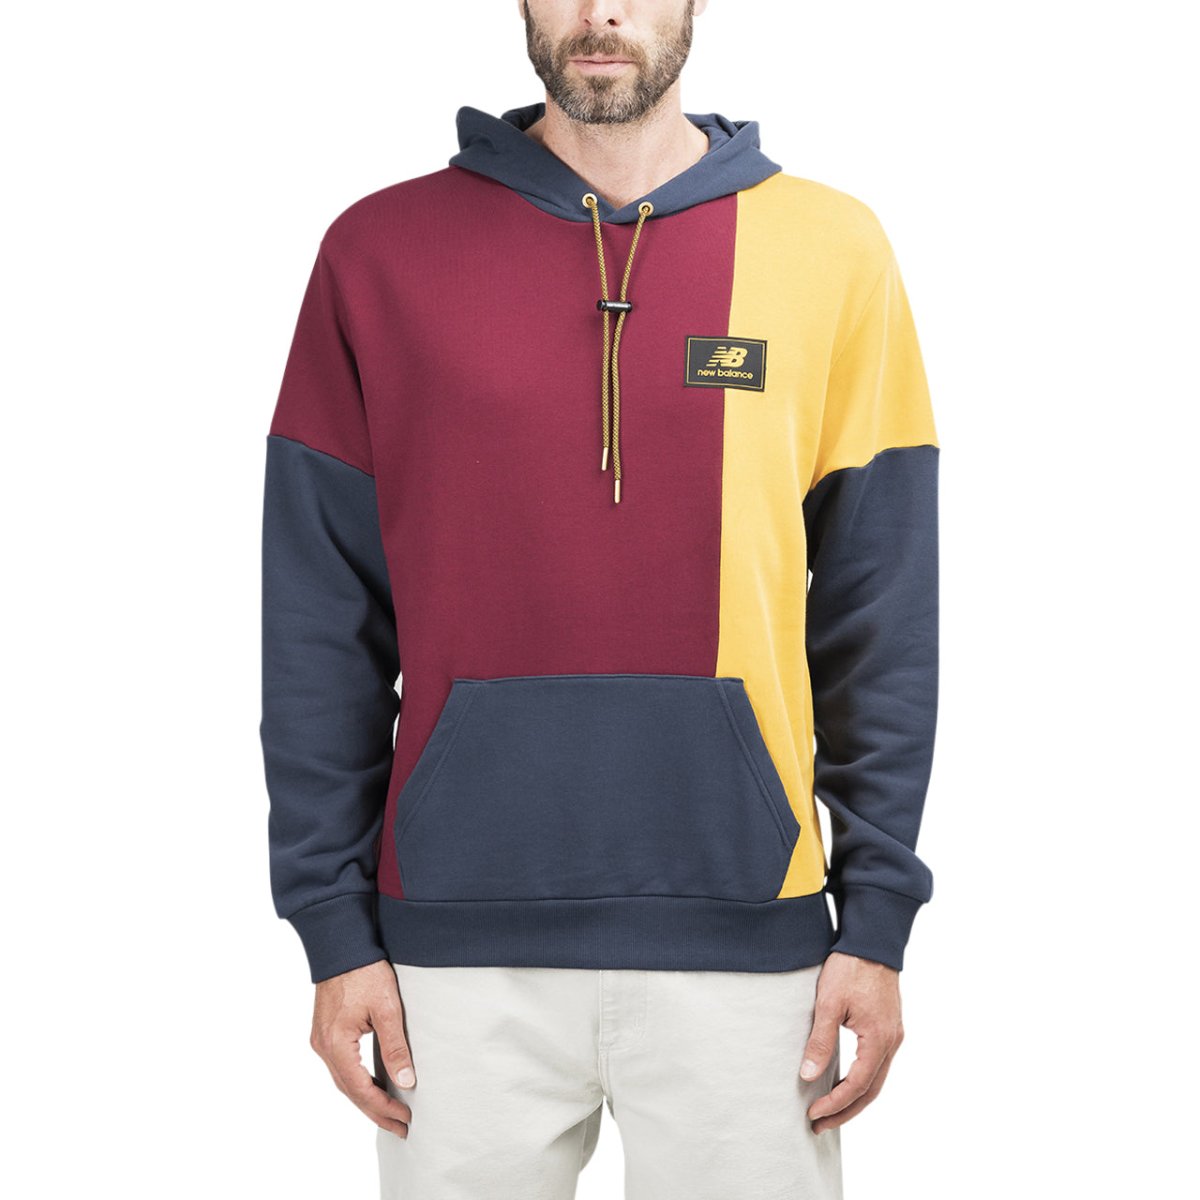 Image of New Balance Athletics Higher Learning Hoodie (Multi)